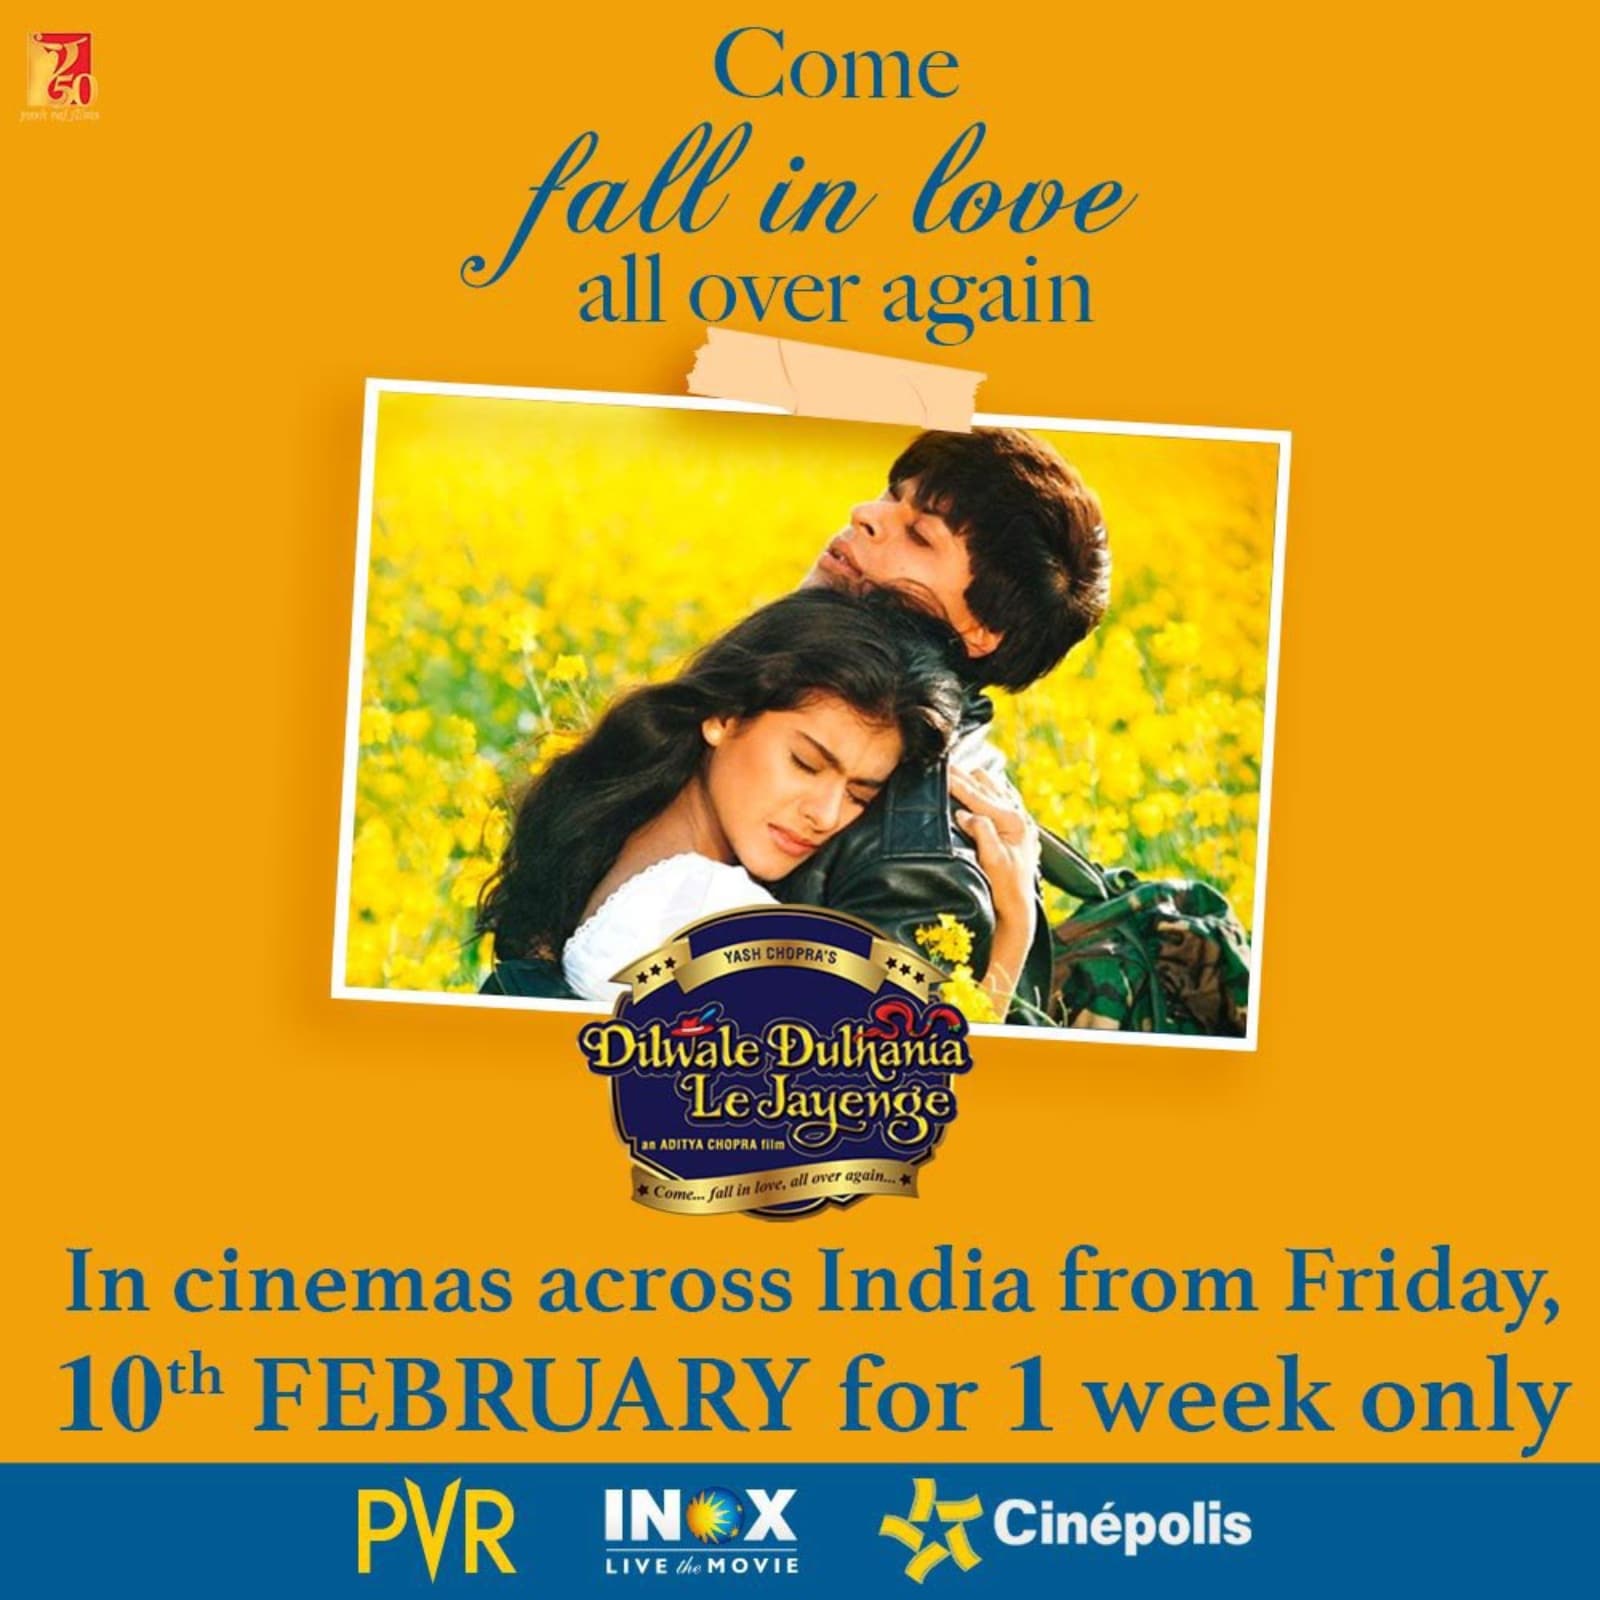 Watch Bollywood Classics Like DDLJ & More On World Bollywood Day At This  Theatre In Dubai!